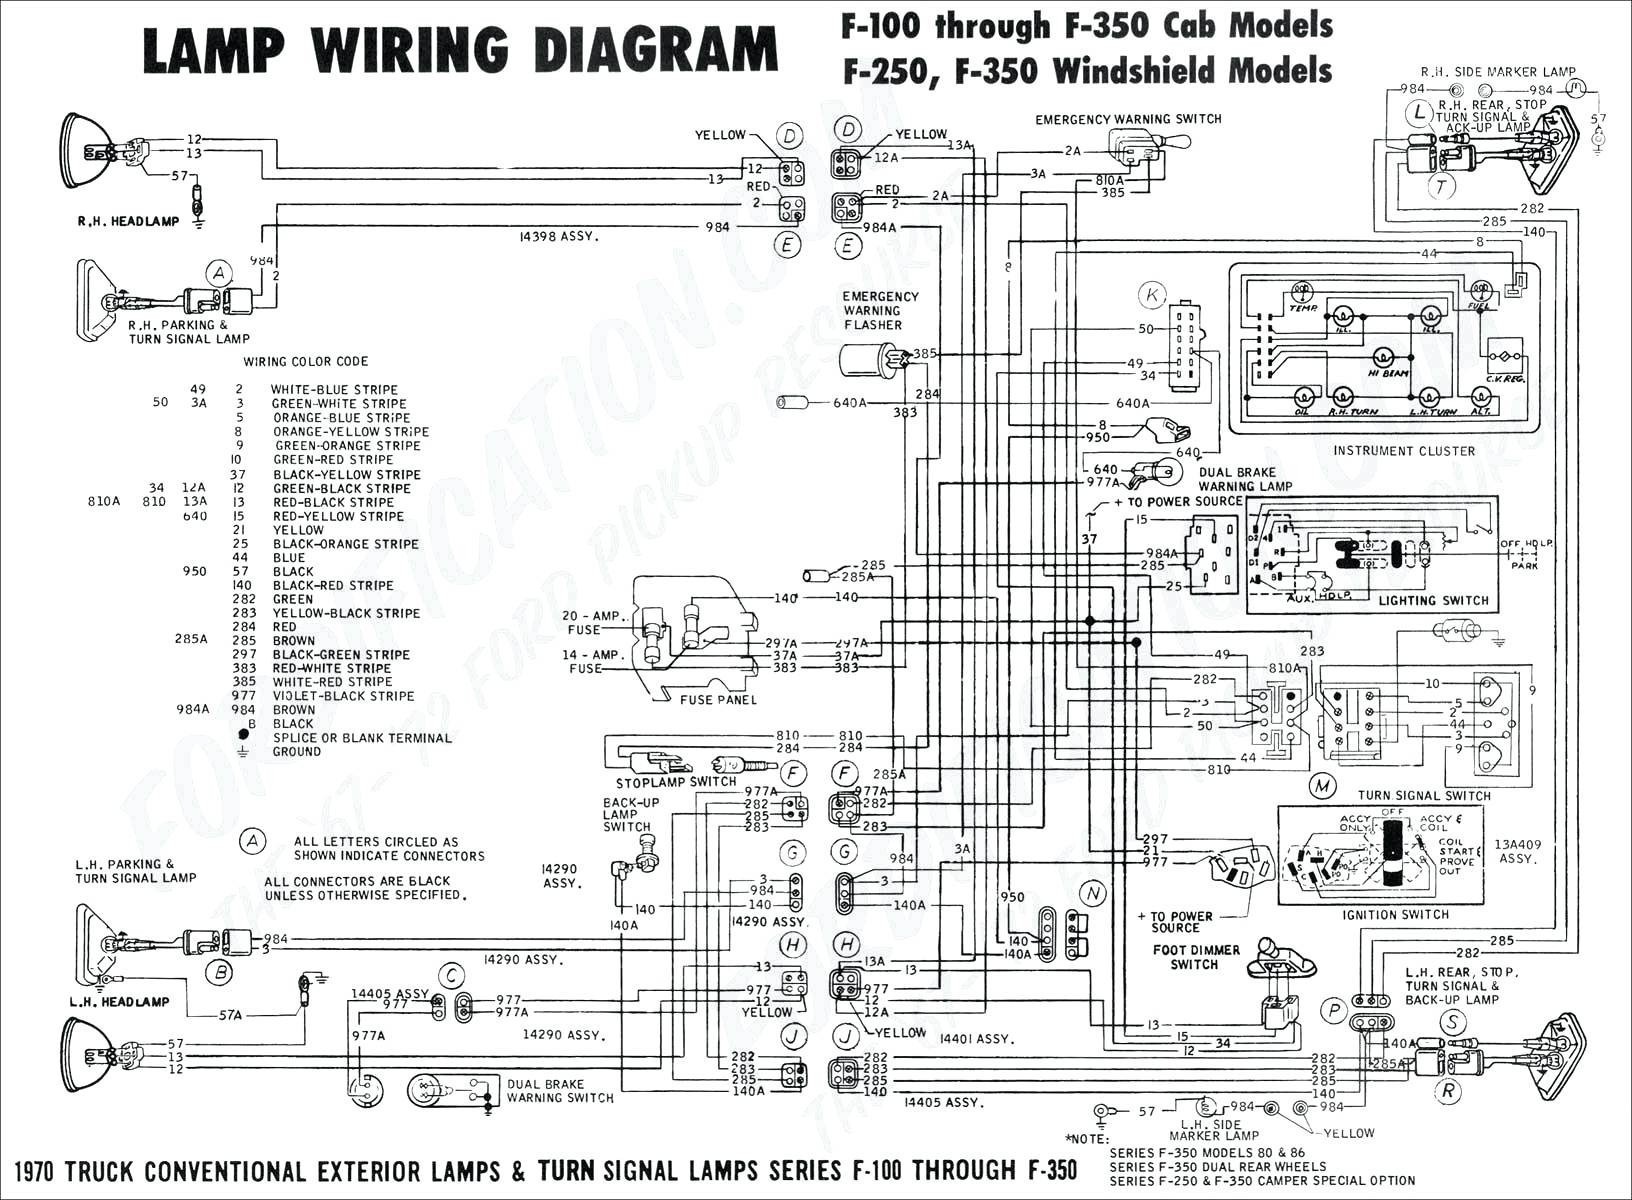 2000 Ford F 250 Wiring Diagram Wiring Diagram For You 2000 Ford F 250 Wire Diagram For Lights